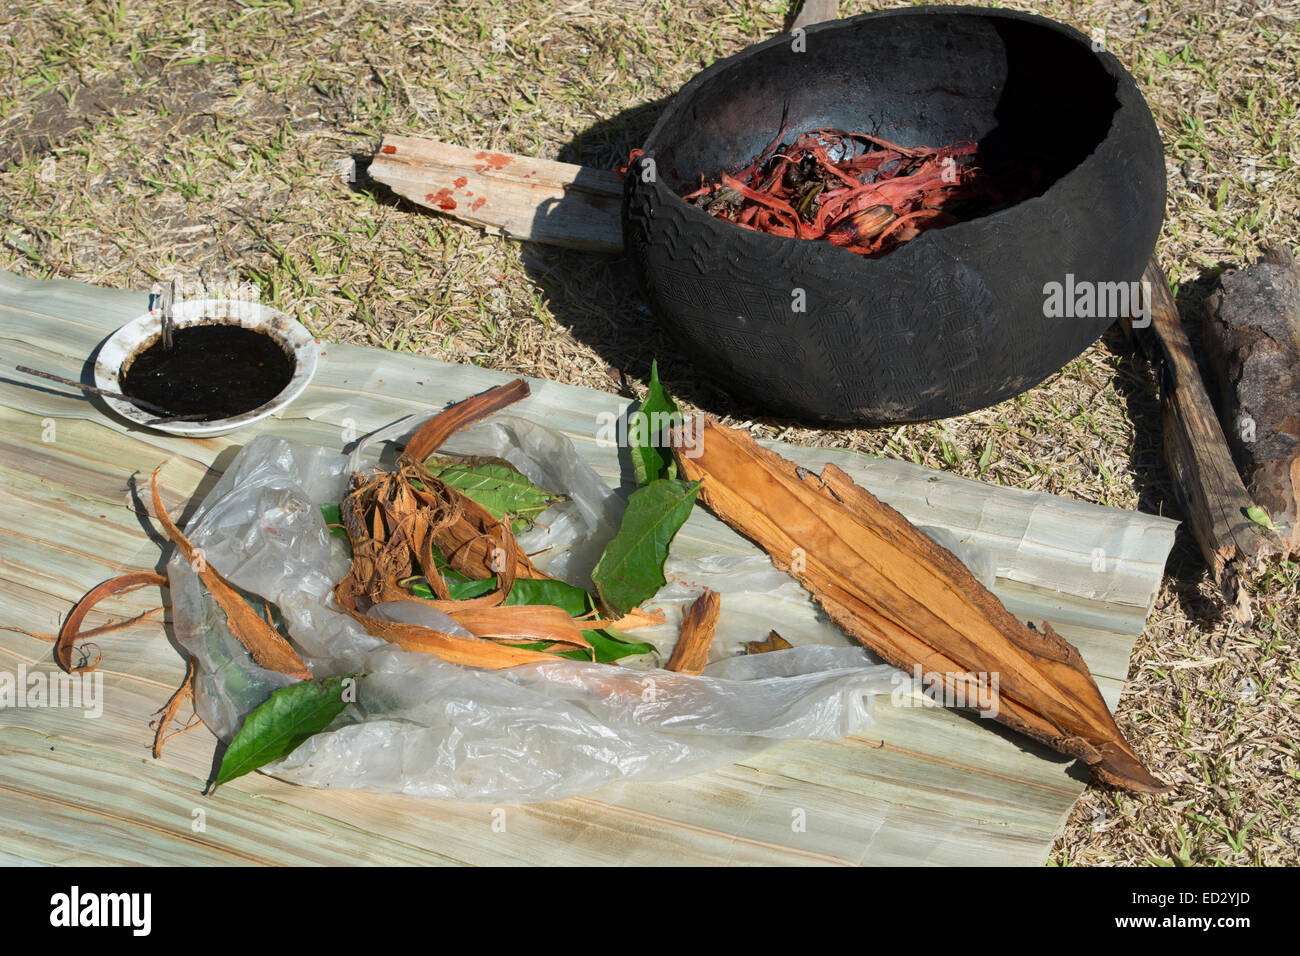 Papua New Guinea, Tufi. Ingredients used in making traditional tapa cloth, made from the paper mulberry tree. Stock Photo